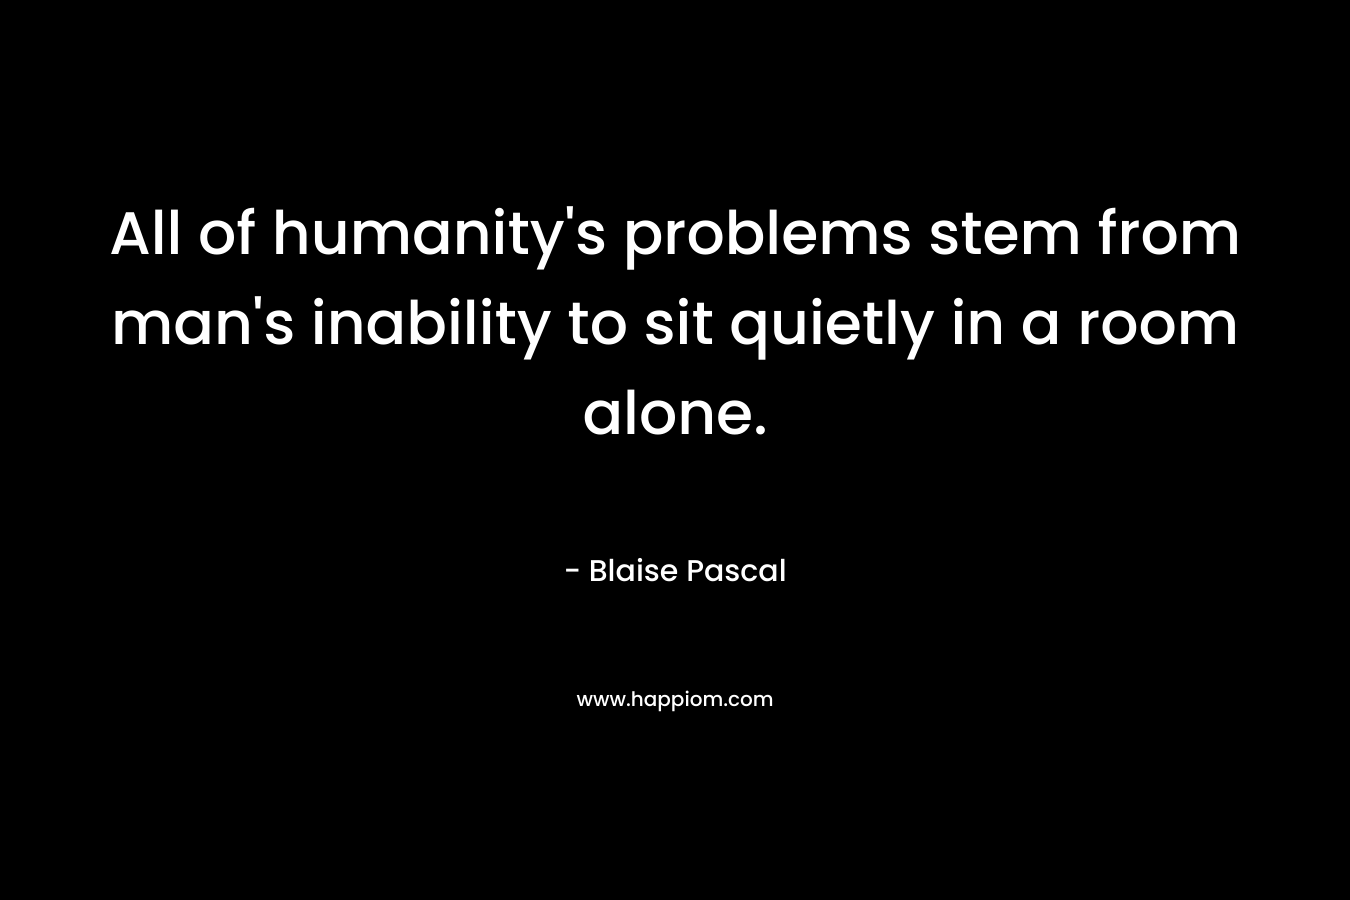 All of humanity's problems stem from man's inability to sit quietly in a room alone.